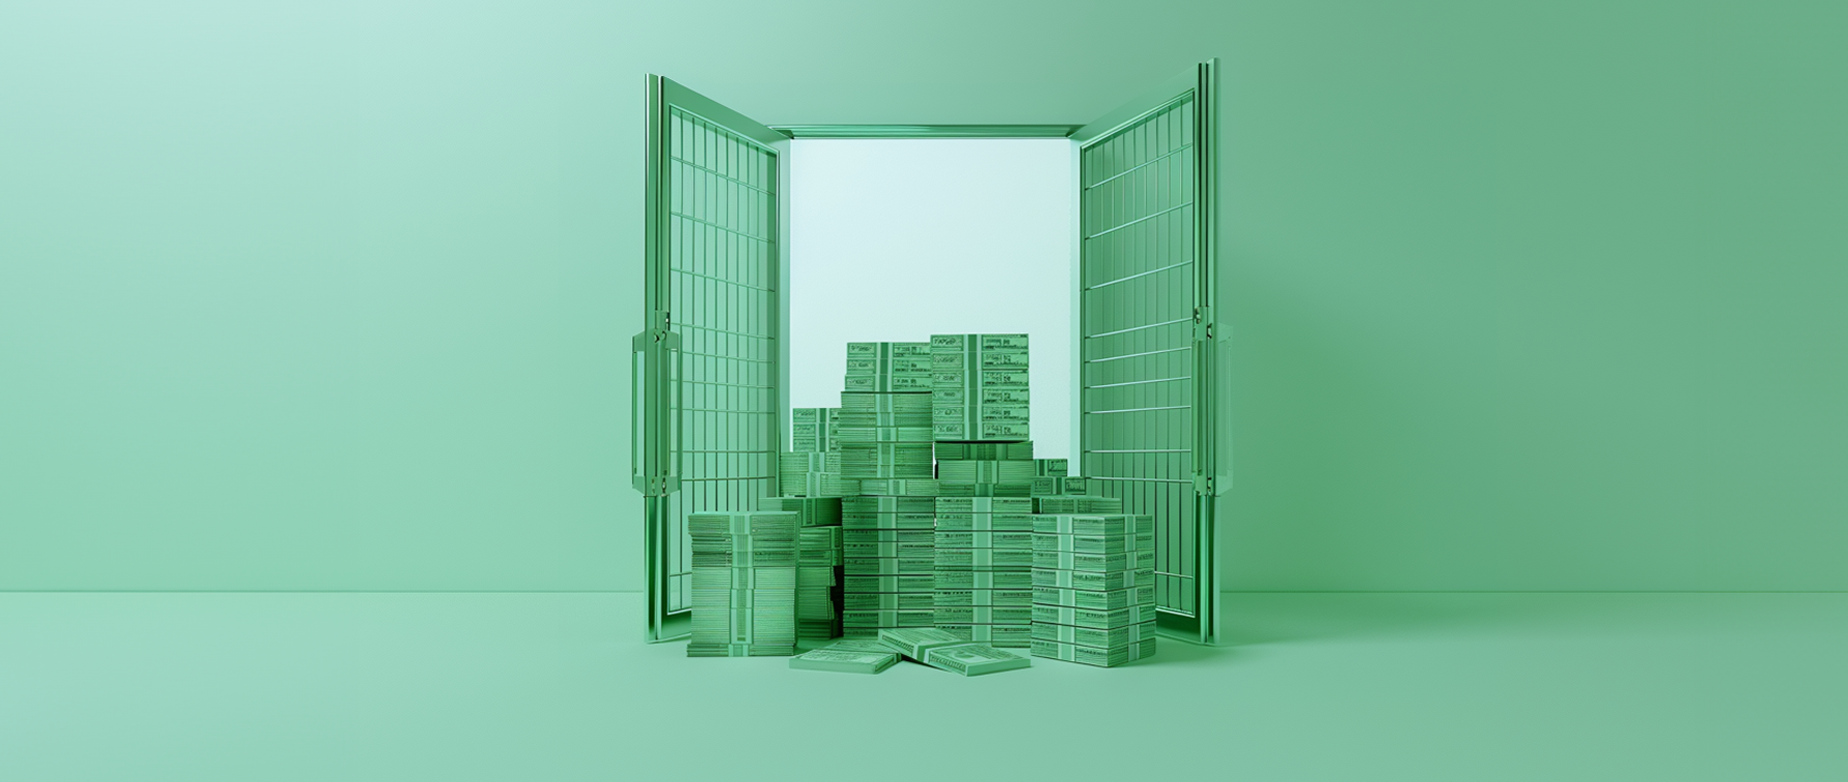 a pile of cash in front of a green gate representing payment gateways